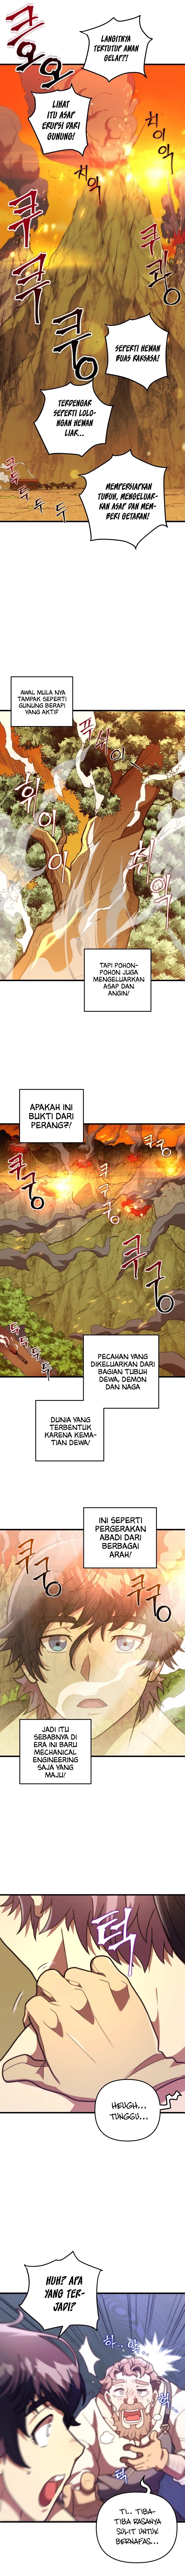 1rm’s Gigant Rider Chapter 2